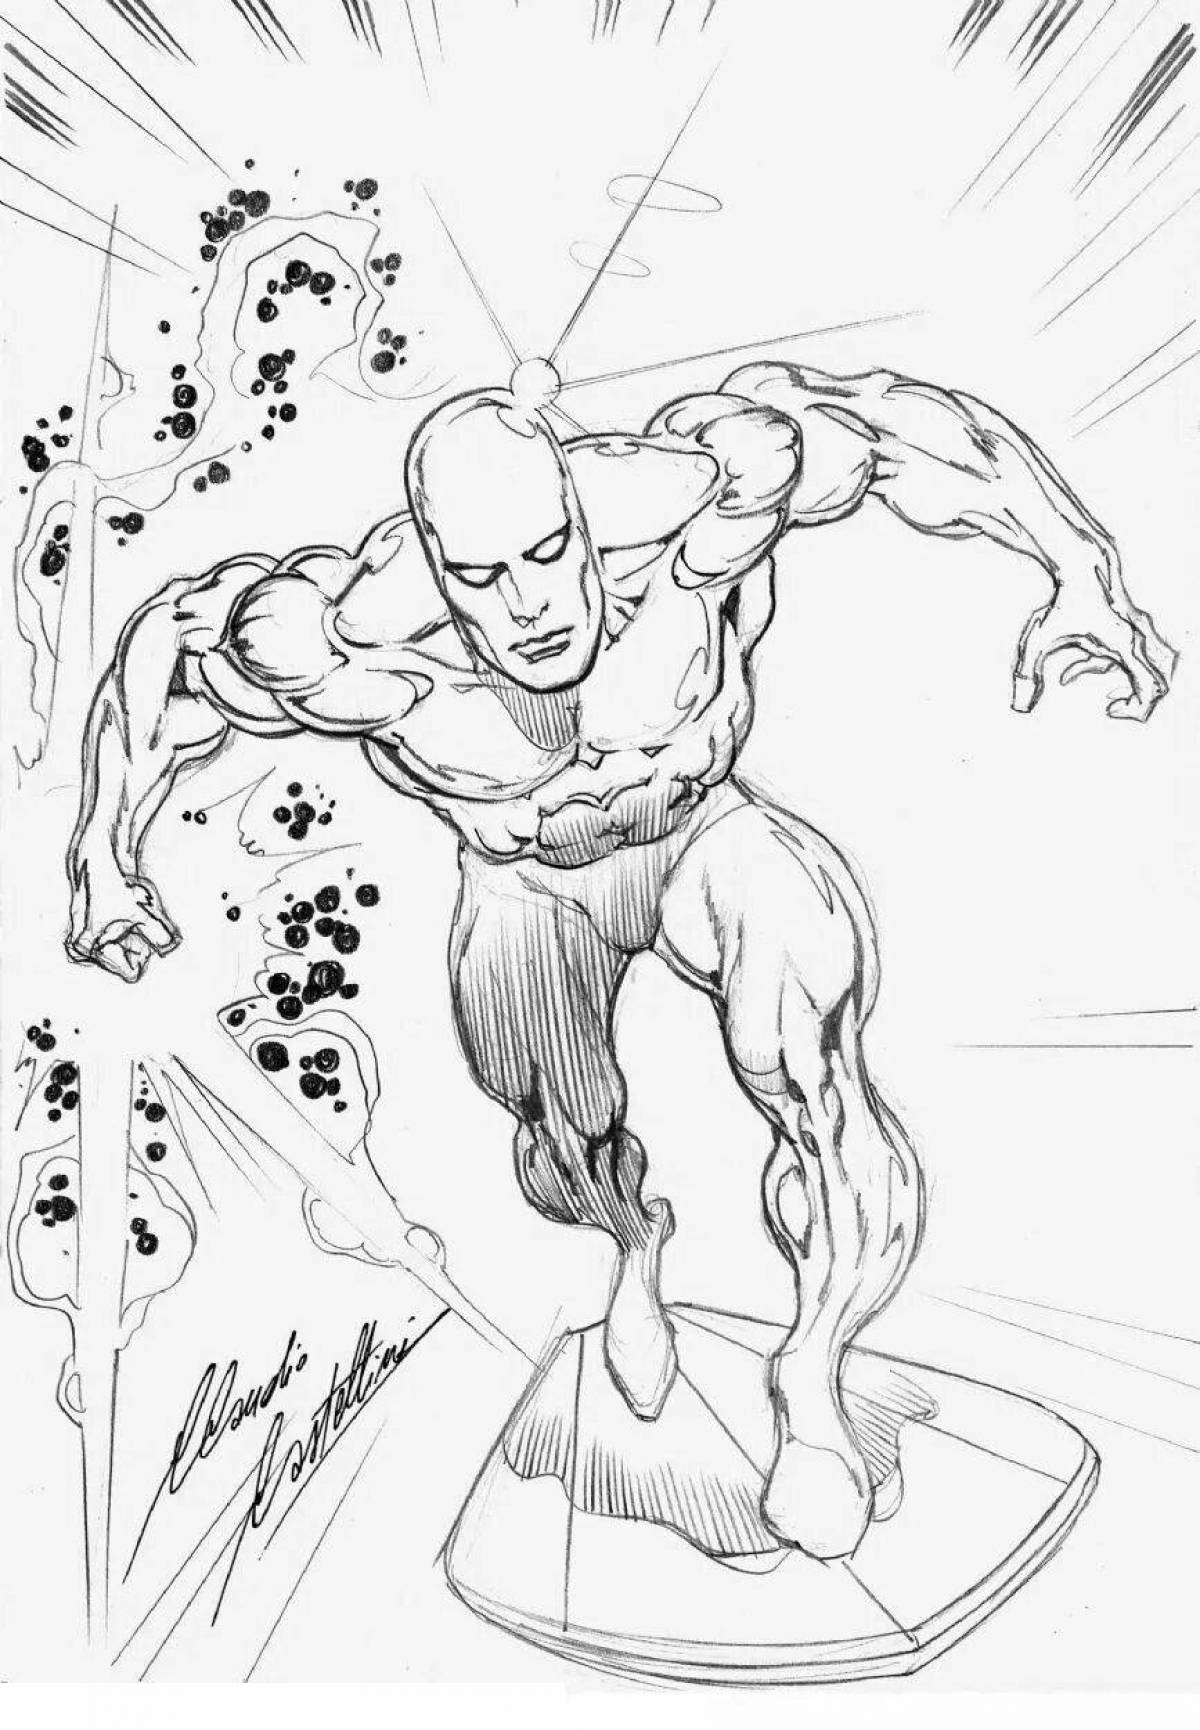 Awesome silver surfer coloring page